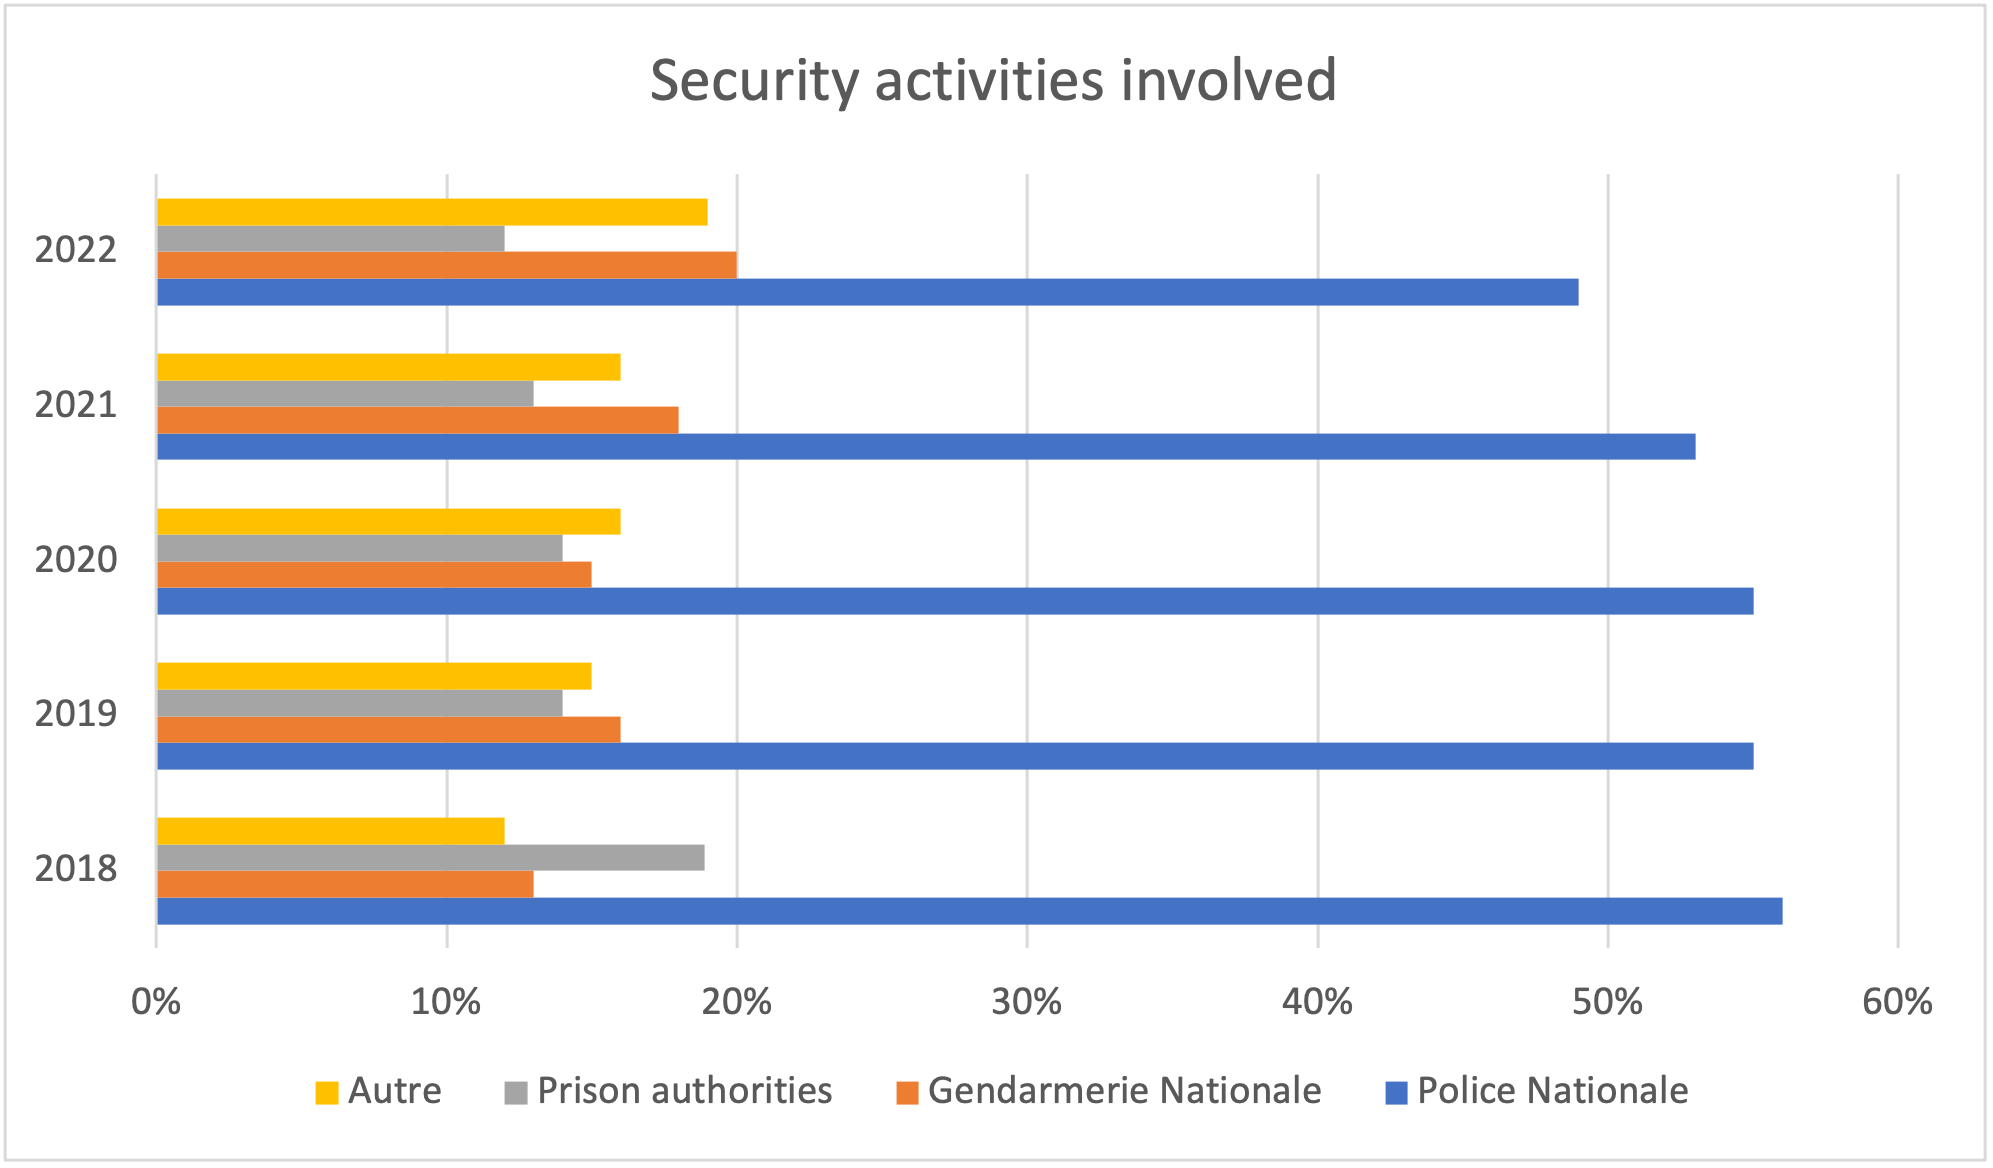 France InfoGrahpic 2 - Security activities involved